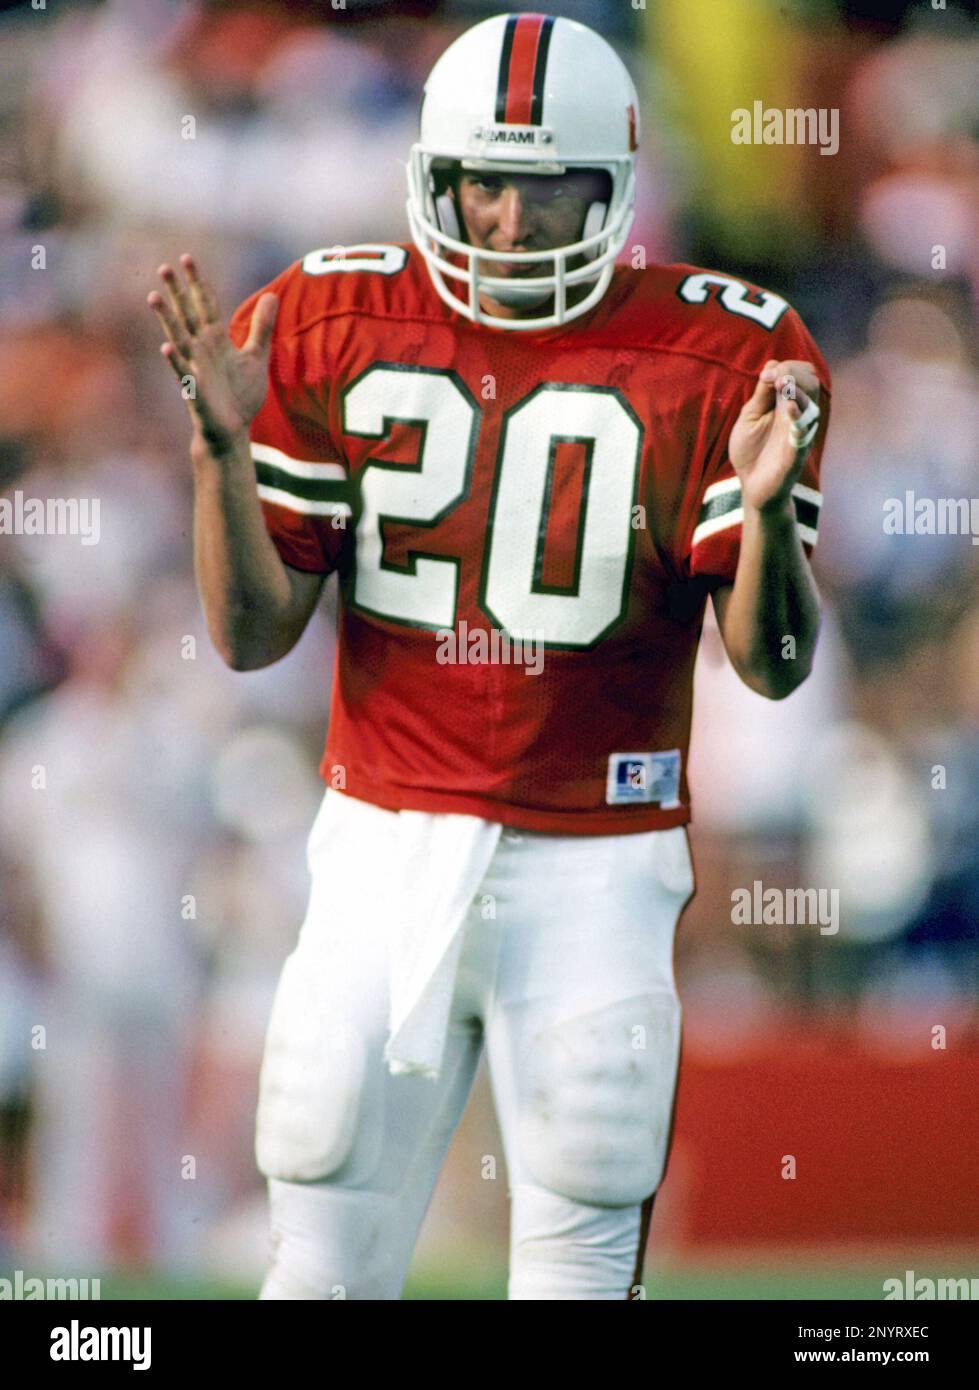 University of Miami quarterback Bernie Kosar (20) sets for play during a  college football game in September 1984 in Miami. (AP Photo / Al  Messerschmidt Stock Photo - Alamy